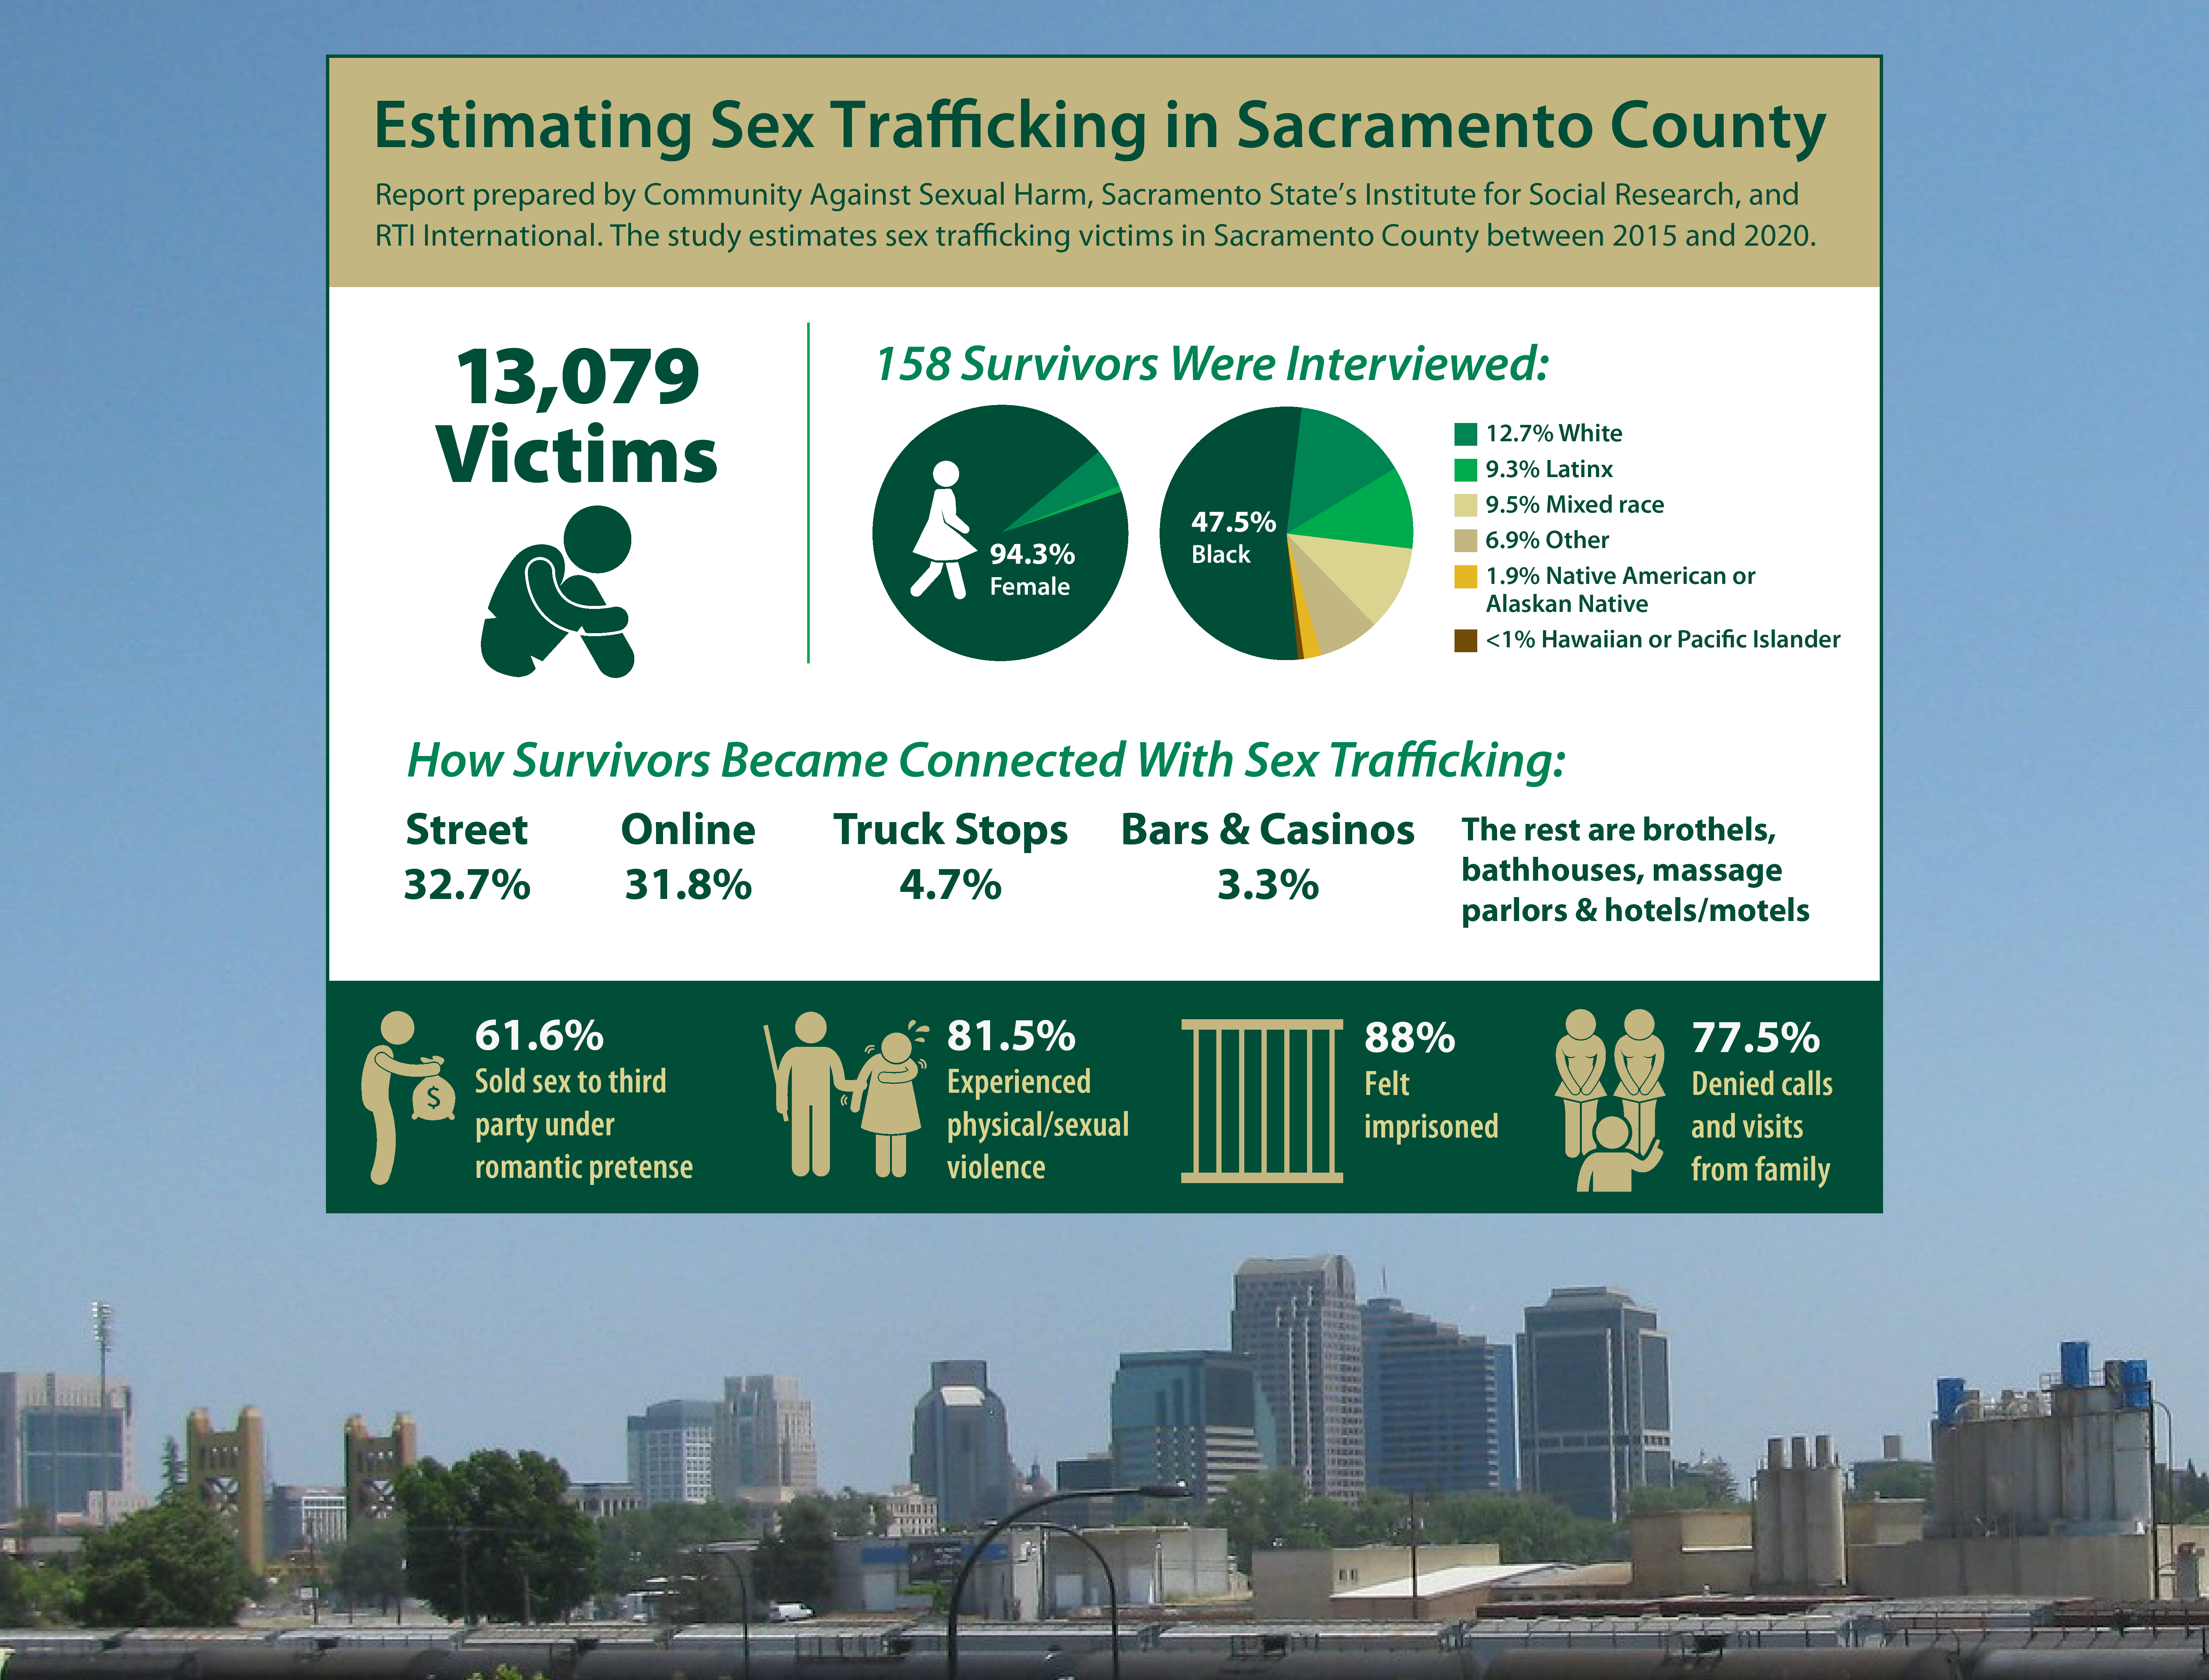 Sac States Institute For Social Research Helps Document Alarming Level Of Sex Trafficking In 8605